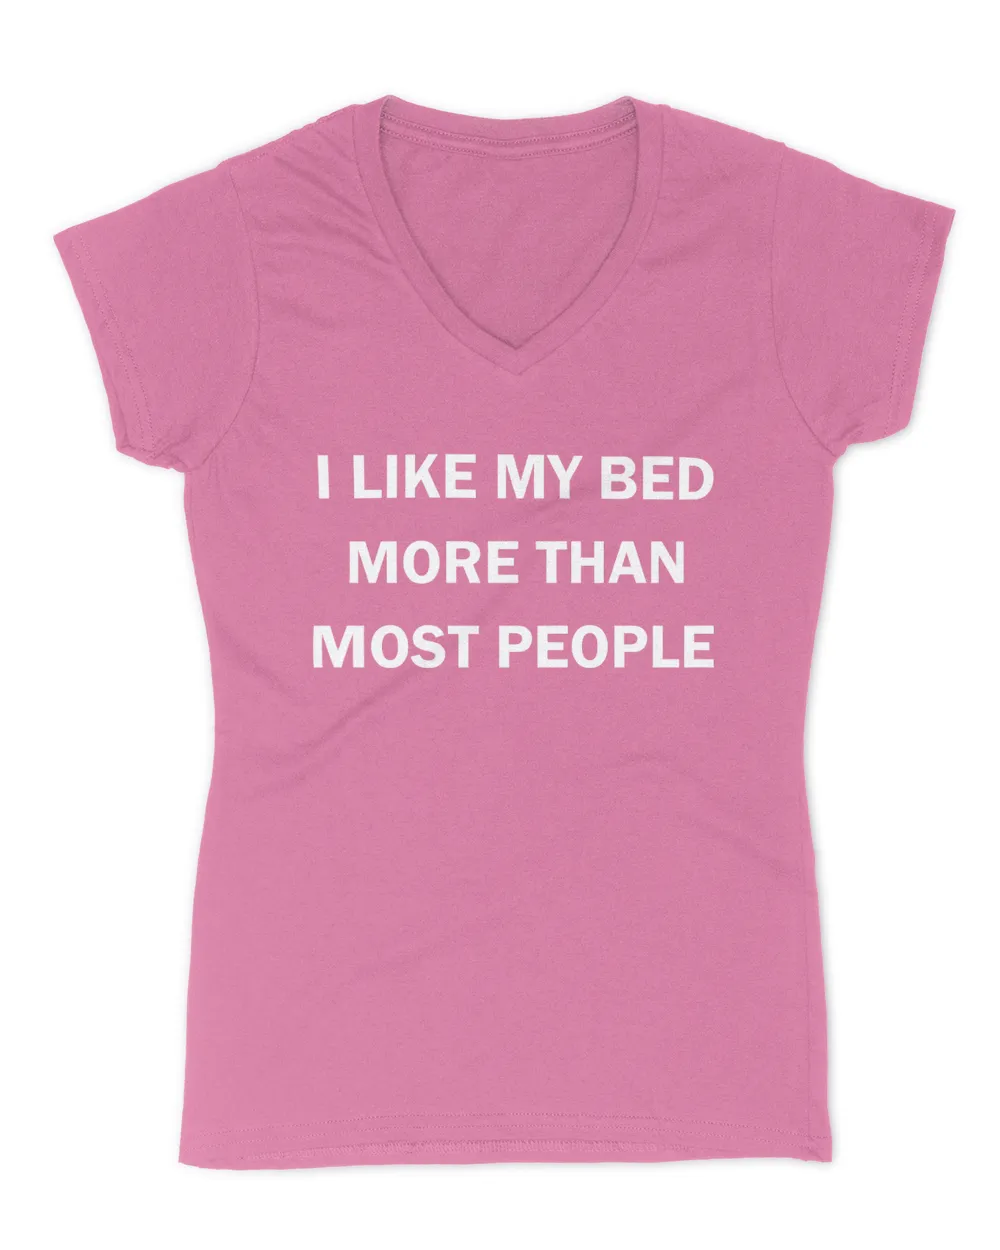 Embracing My Isolation: 'I Like My Bed More Than Most People' Apparel & Accessories